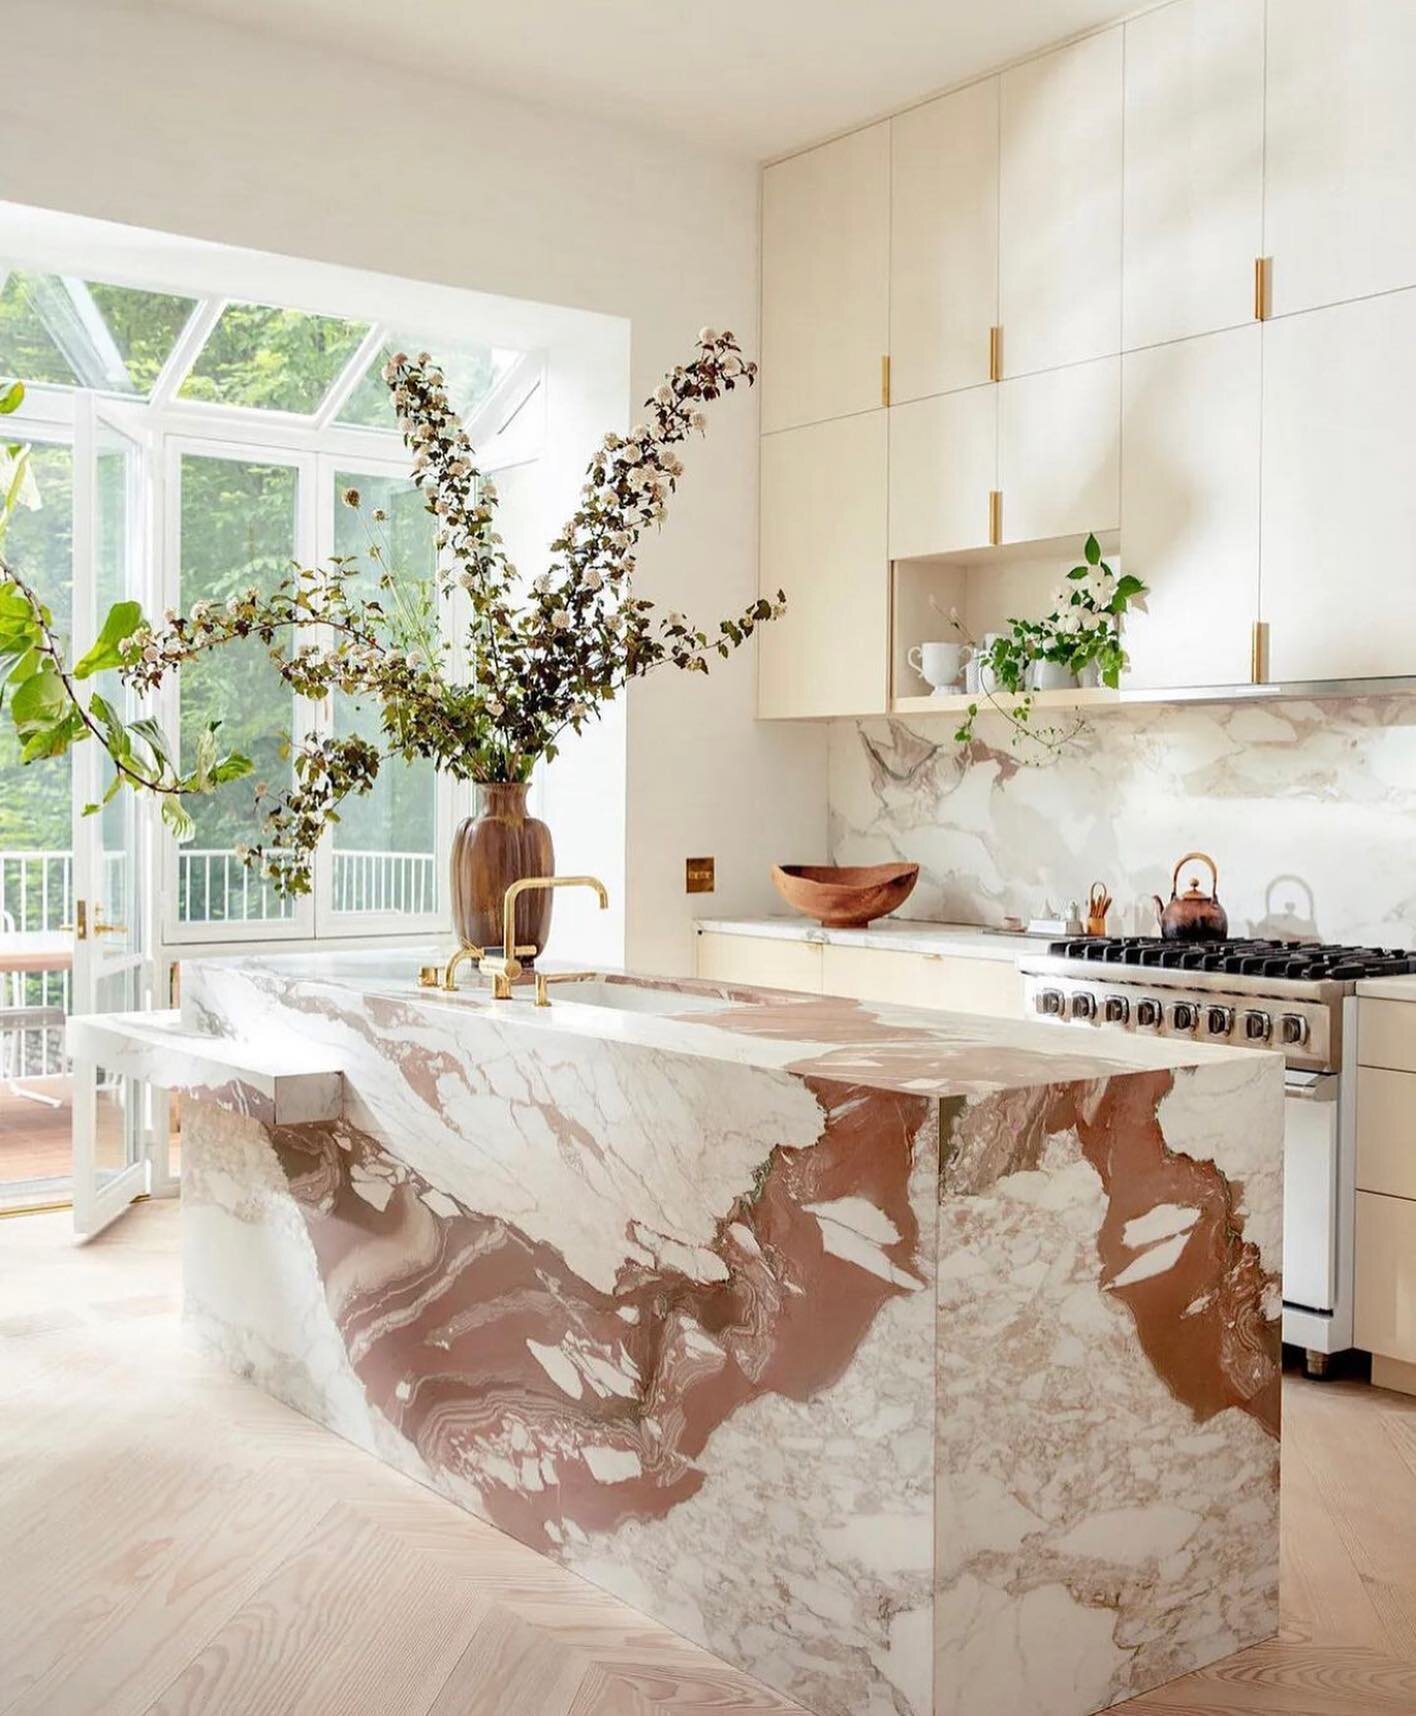 We love the gorgeous Rosy calcutta vagli marble mixed with the minimalist cabinets in this stunning kitchen. Curious if you&rsquo;d say go for it, or tell us we&rsquo;re crazy?? 👏🏻

Design: @alexisbrowninteriordesign_